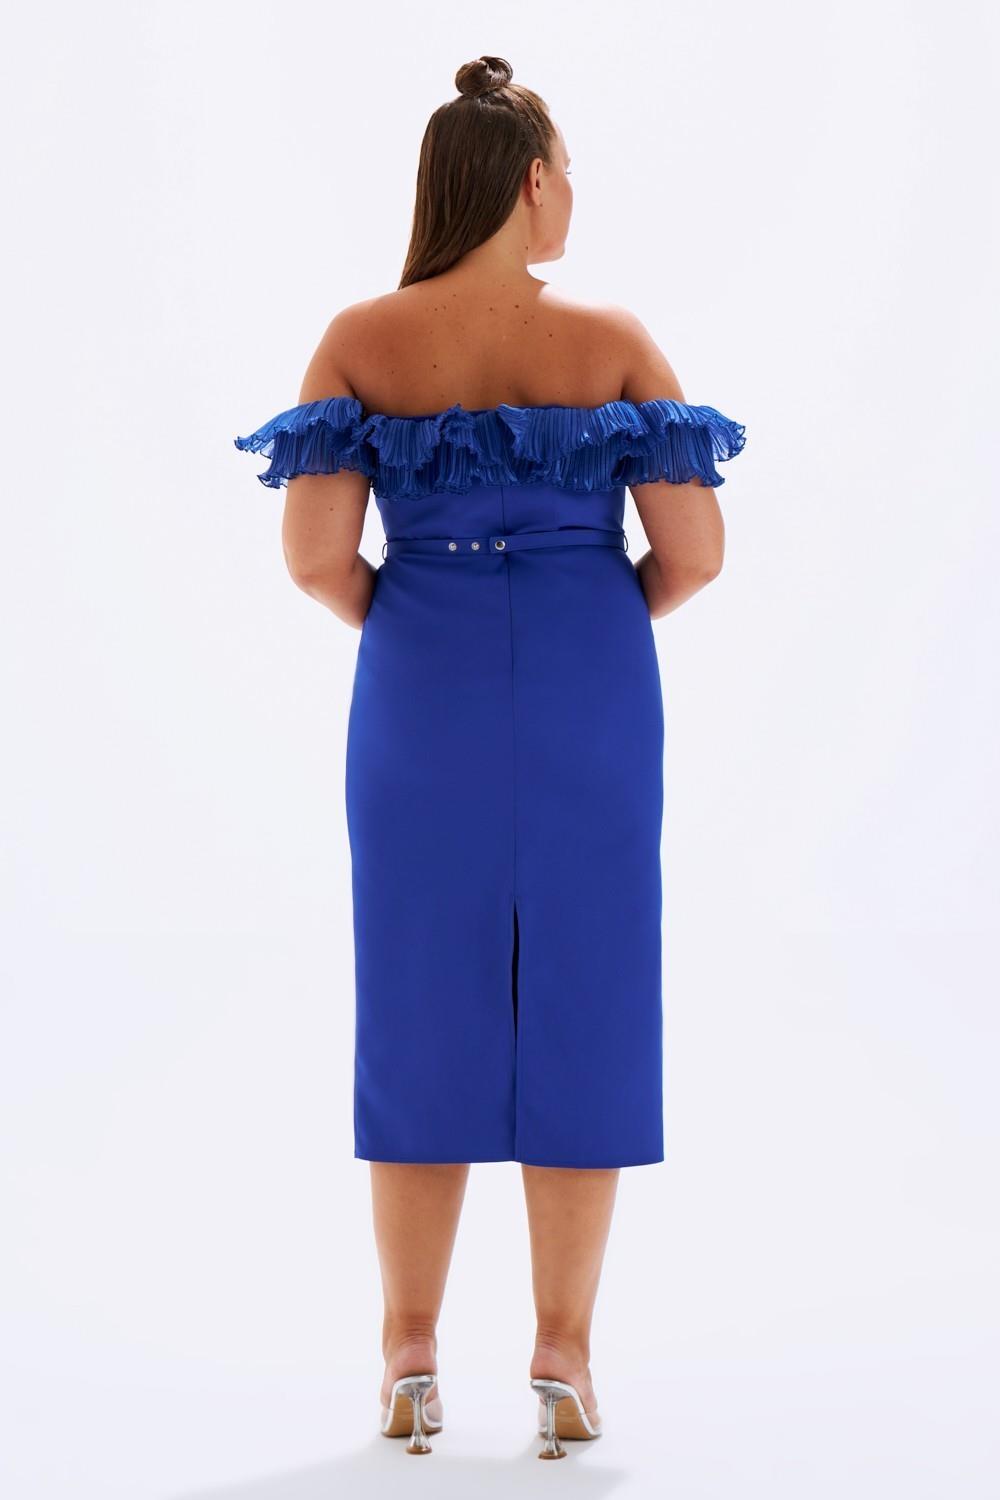 Bust Embroidered Plus Size Evening Dress